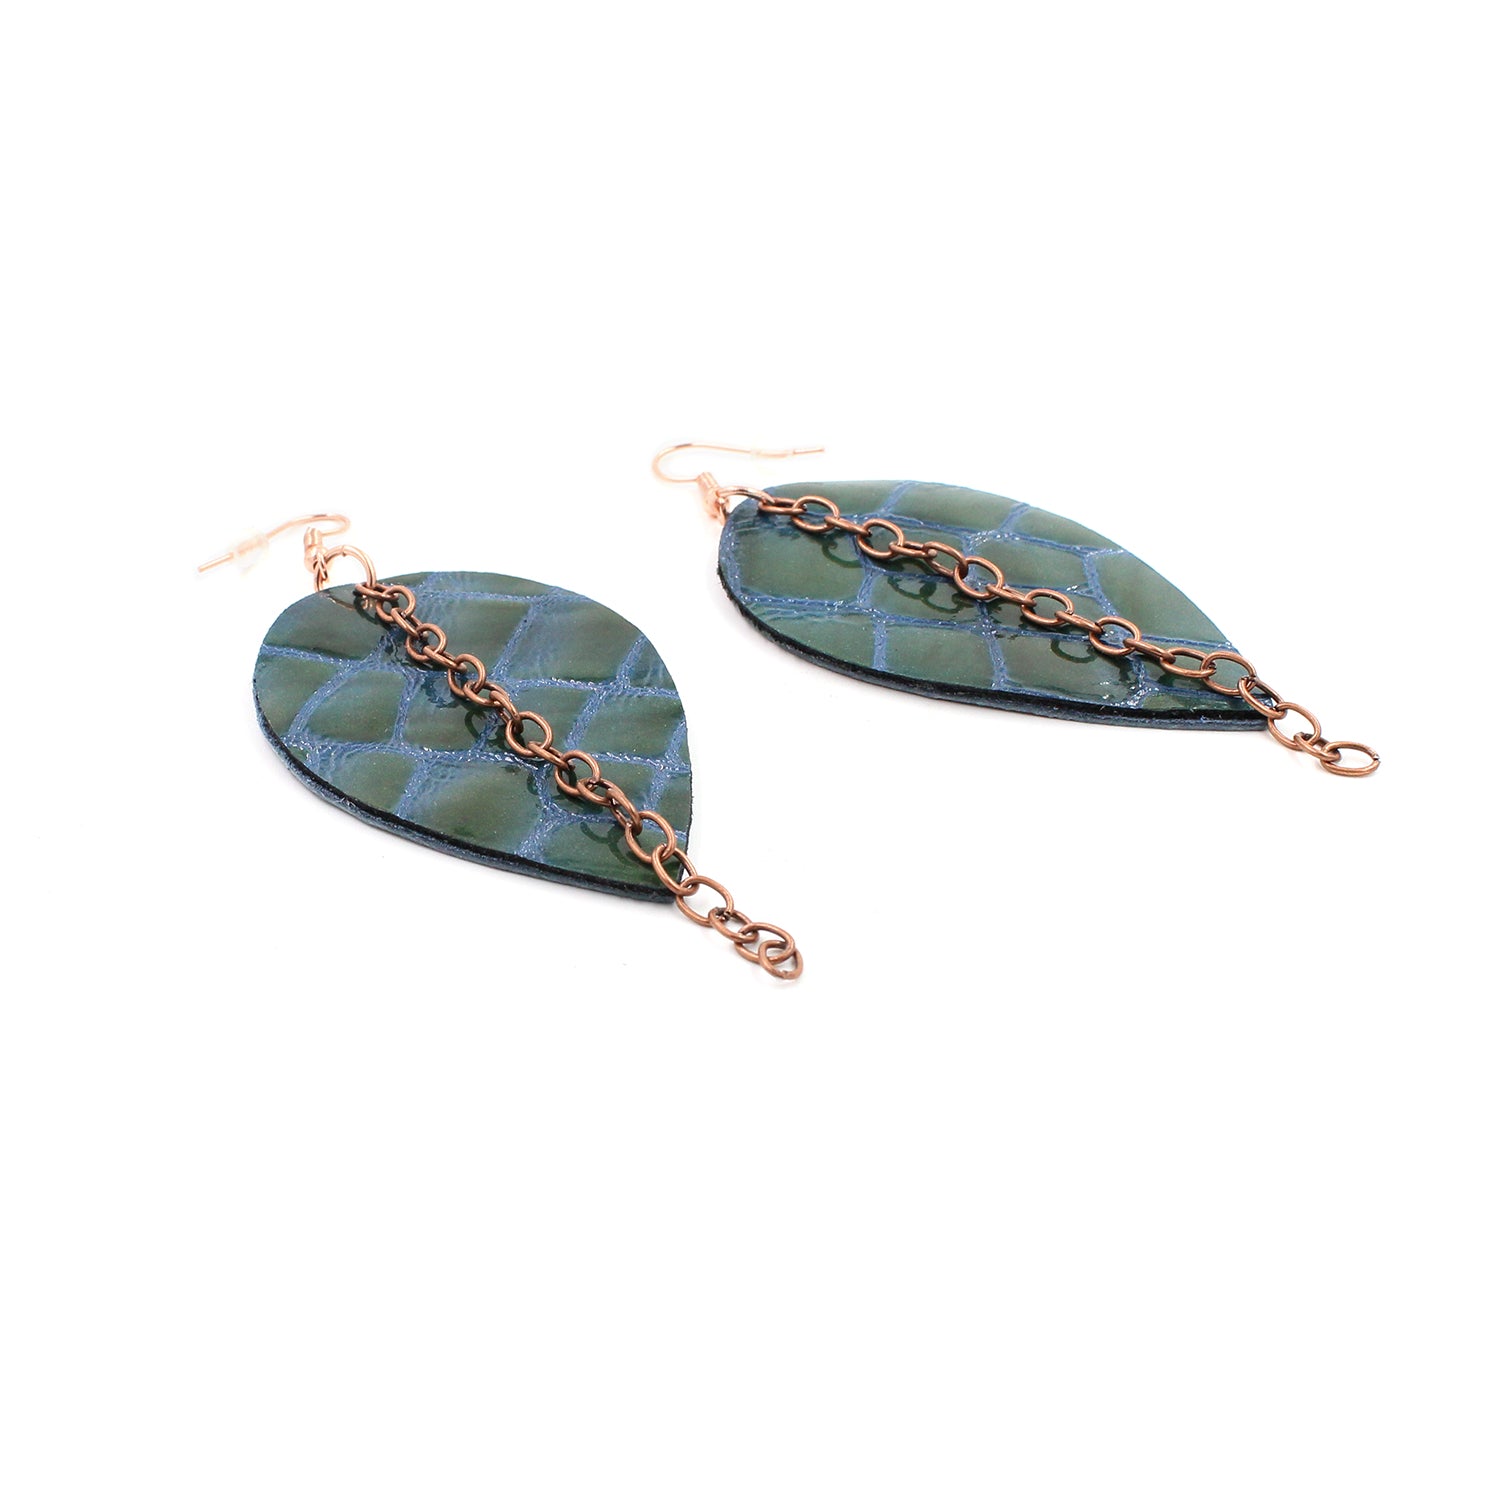 Crocodile Patent Leather Reverse Drop Earrings with Copper Chain